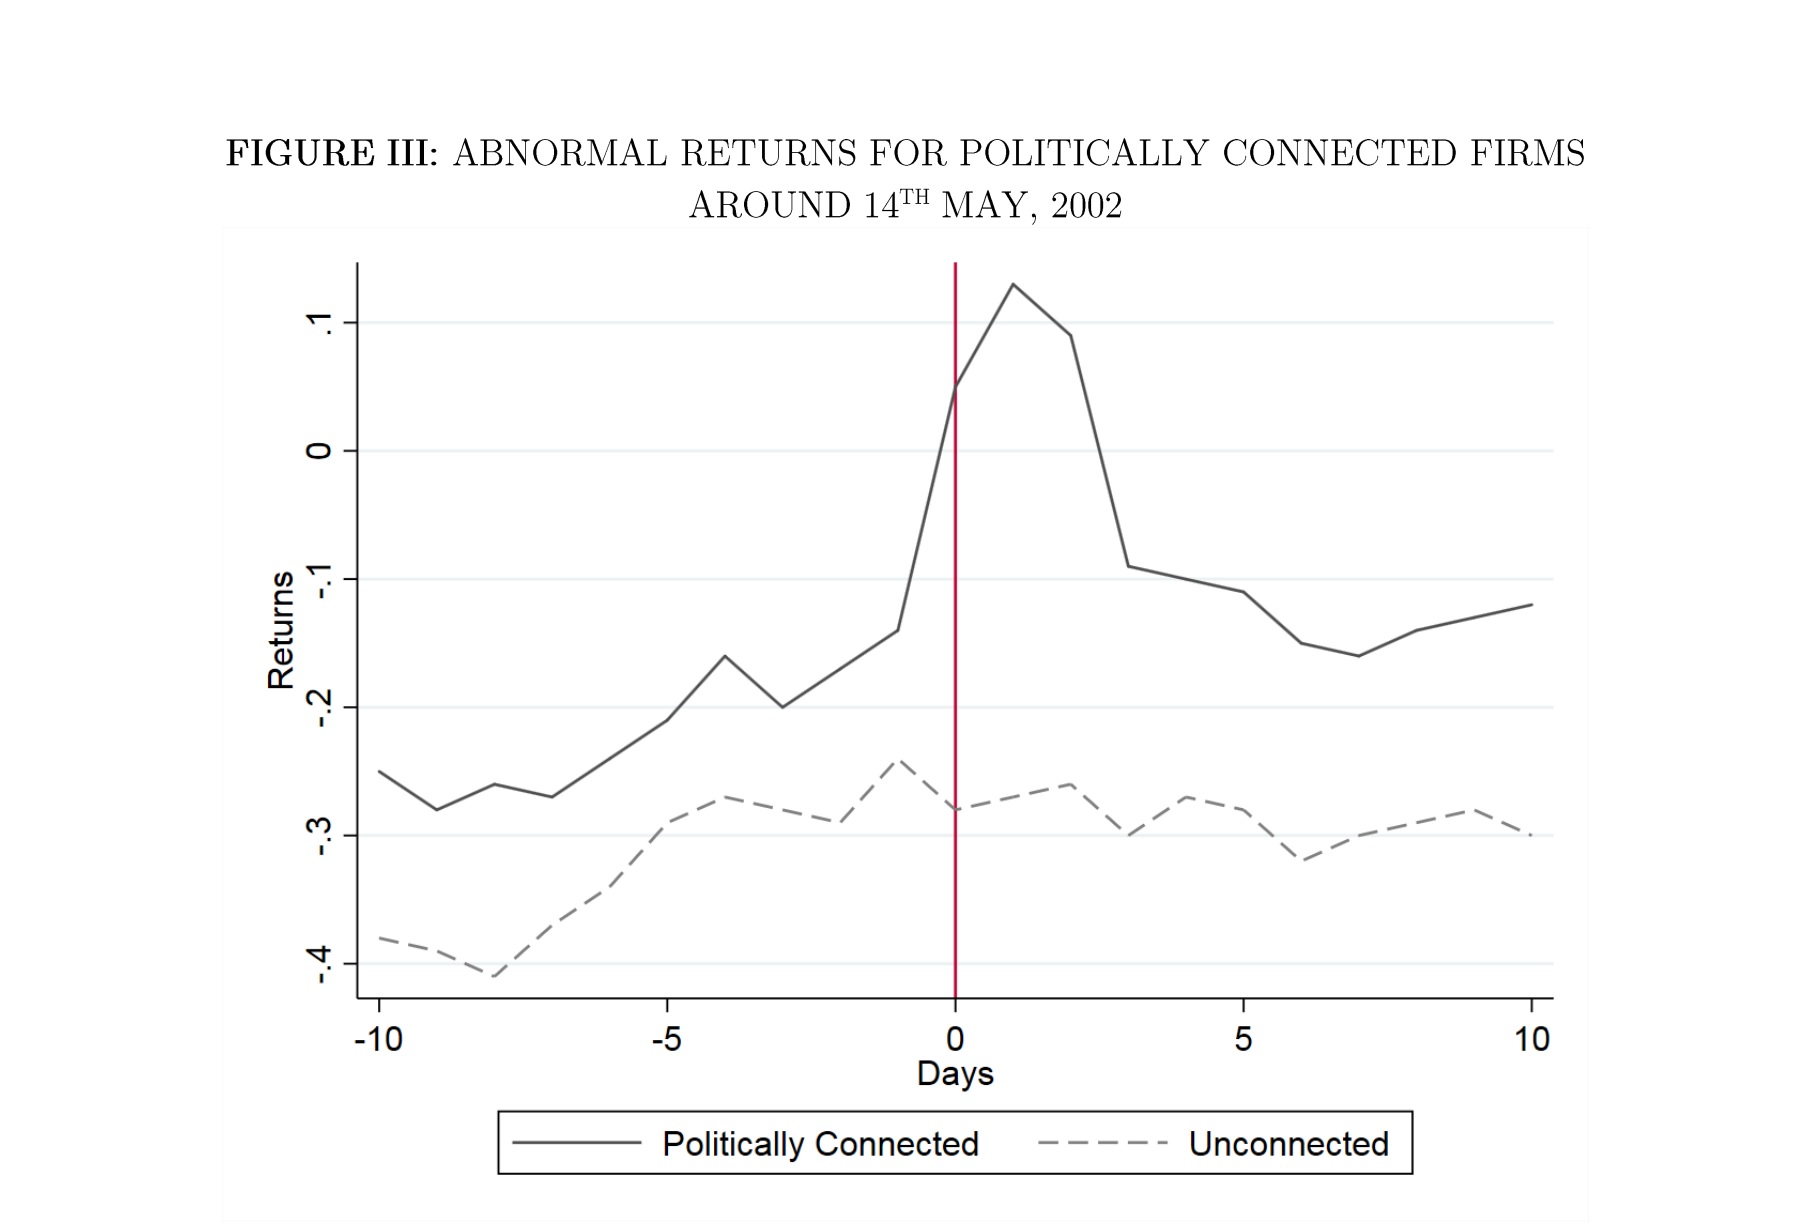 Politically connected firms experienced abnormally high returns around the time of the policy change.